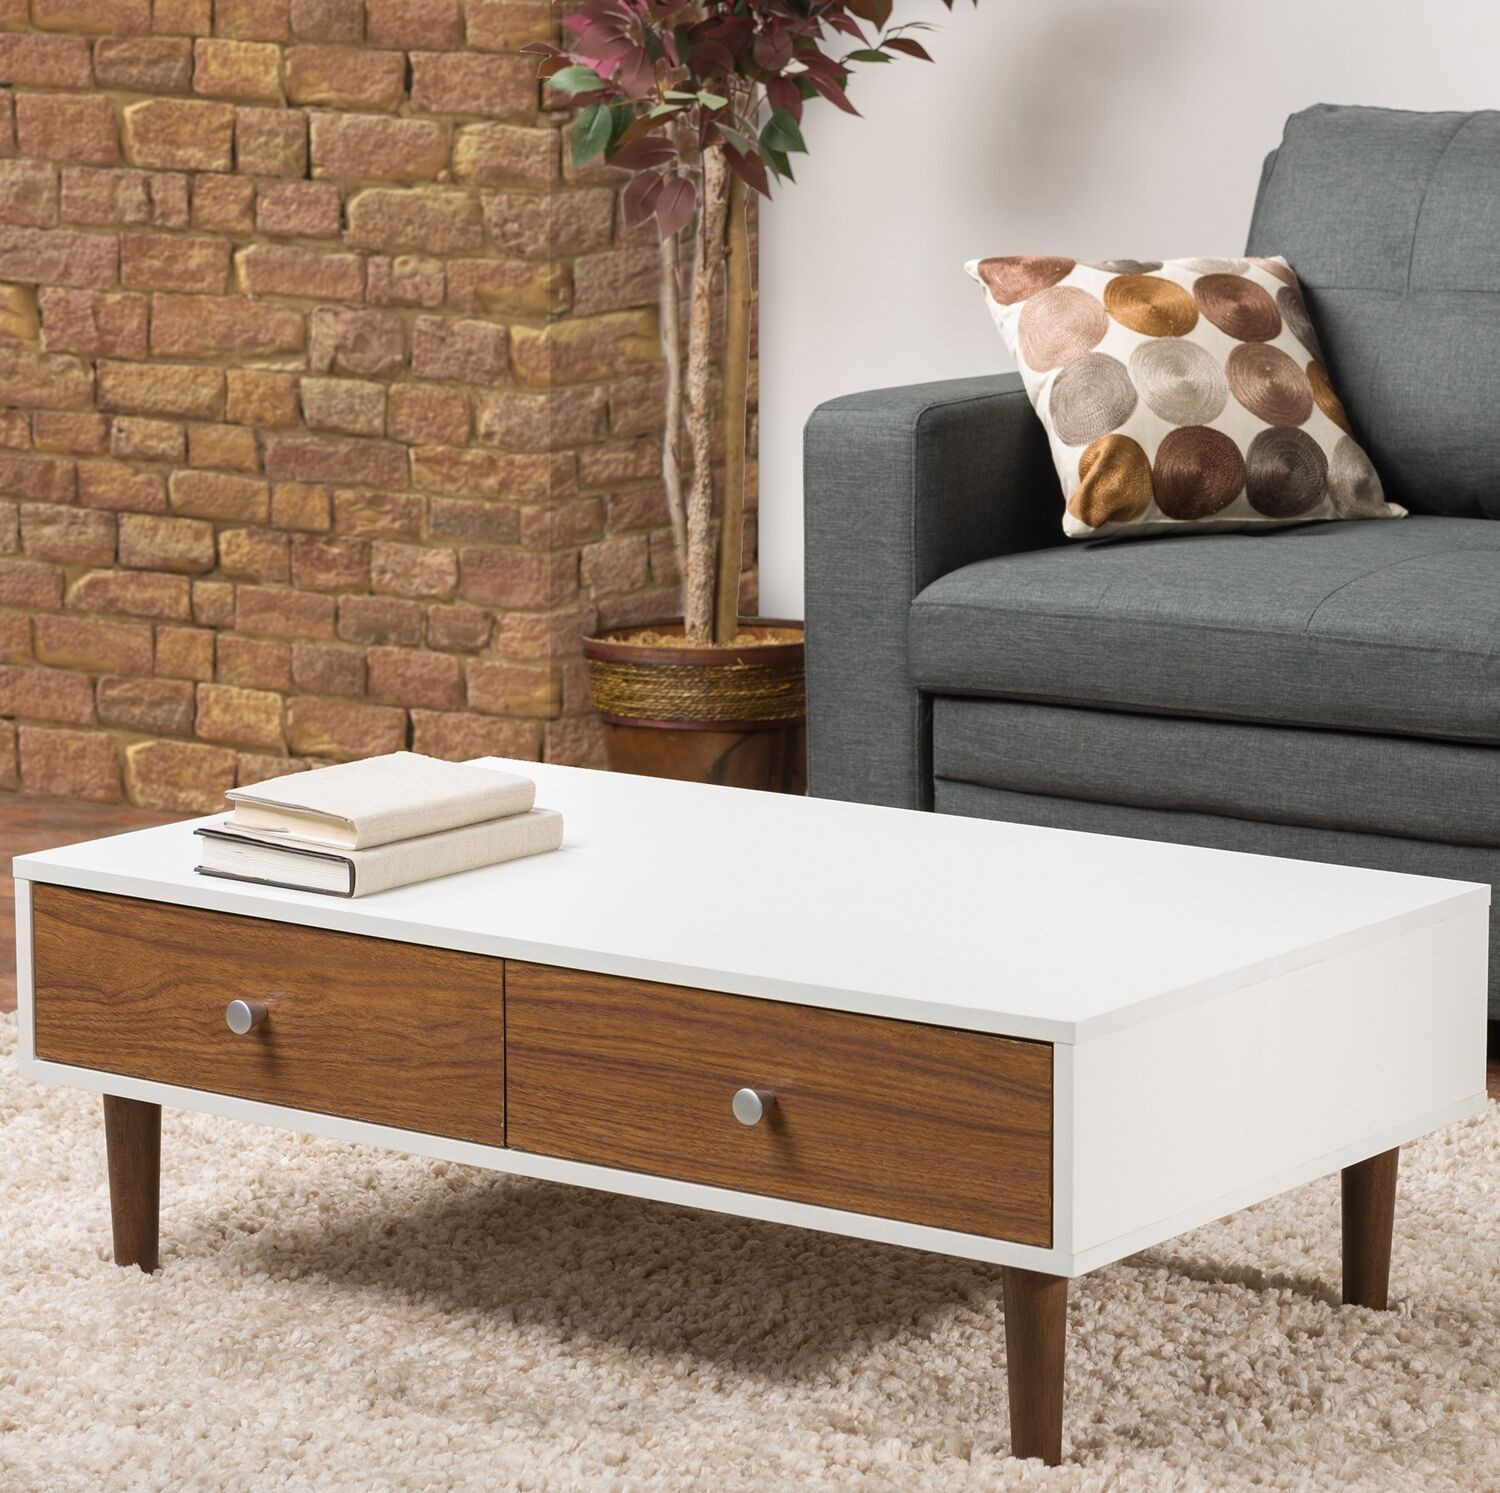 Living Room Tables With Storage
 White Coffee Table Storage Drawer Modern Wood Furniture